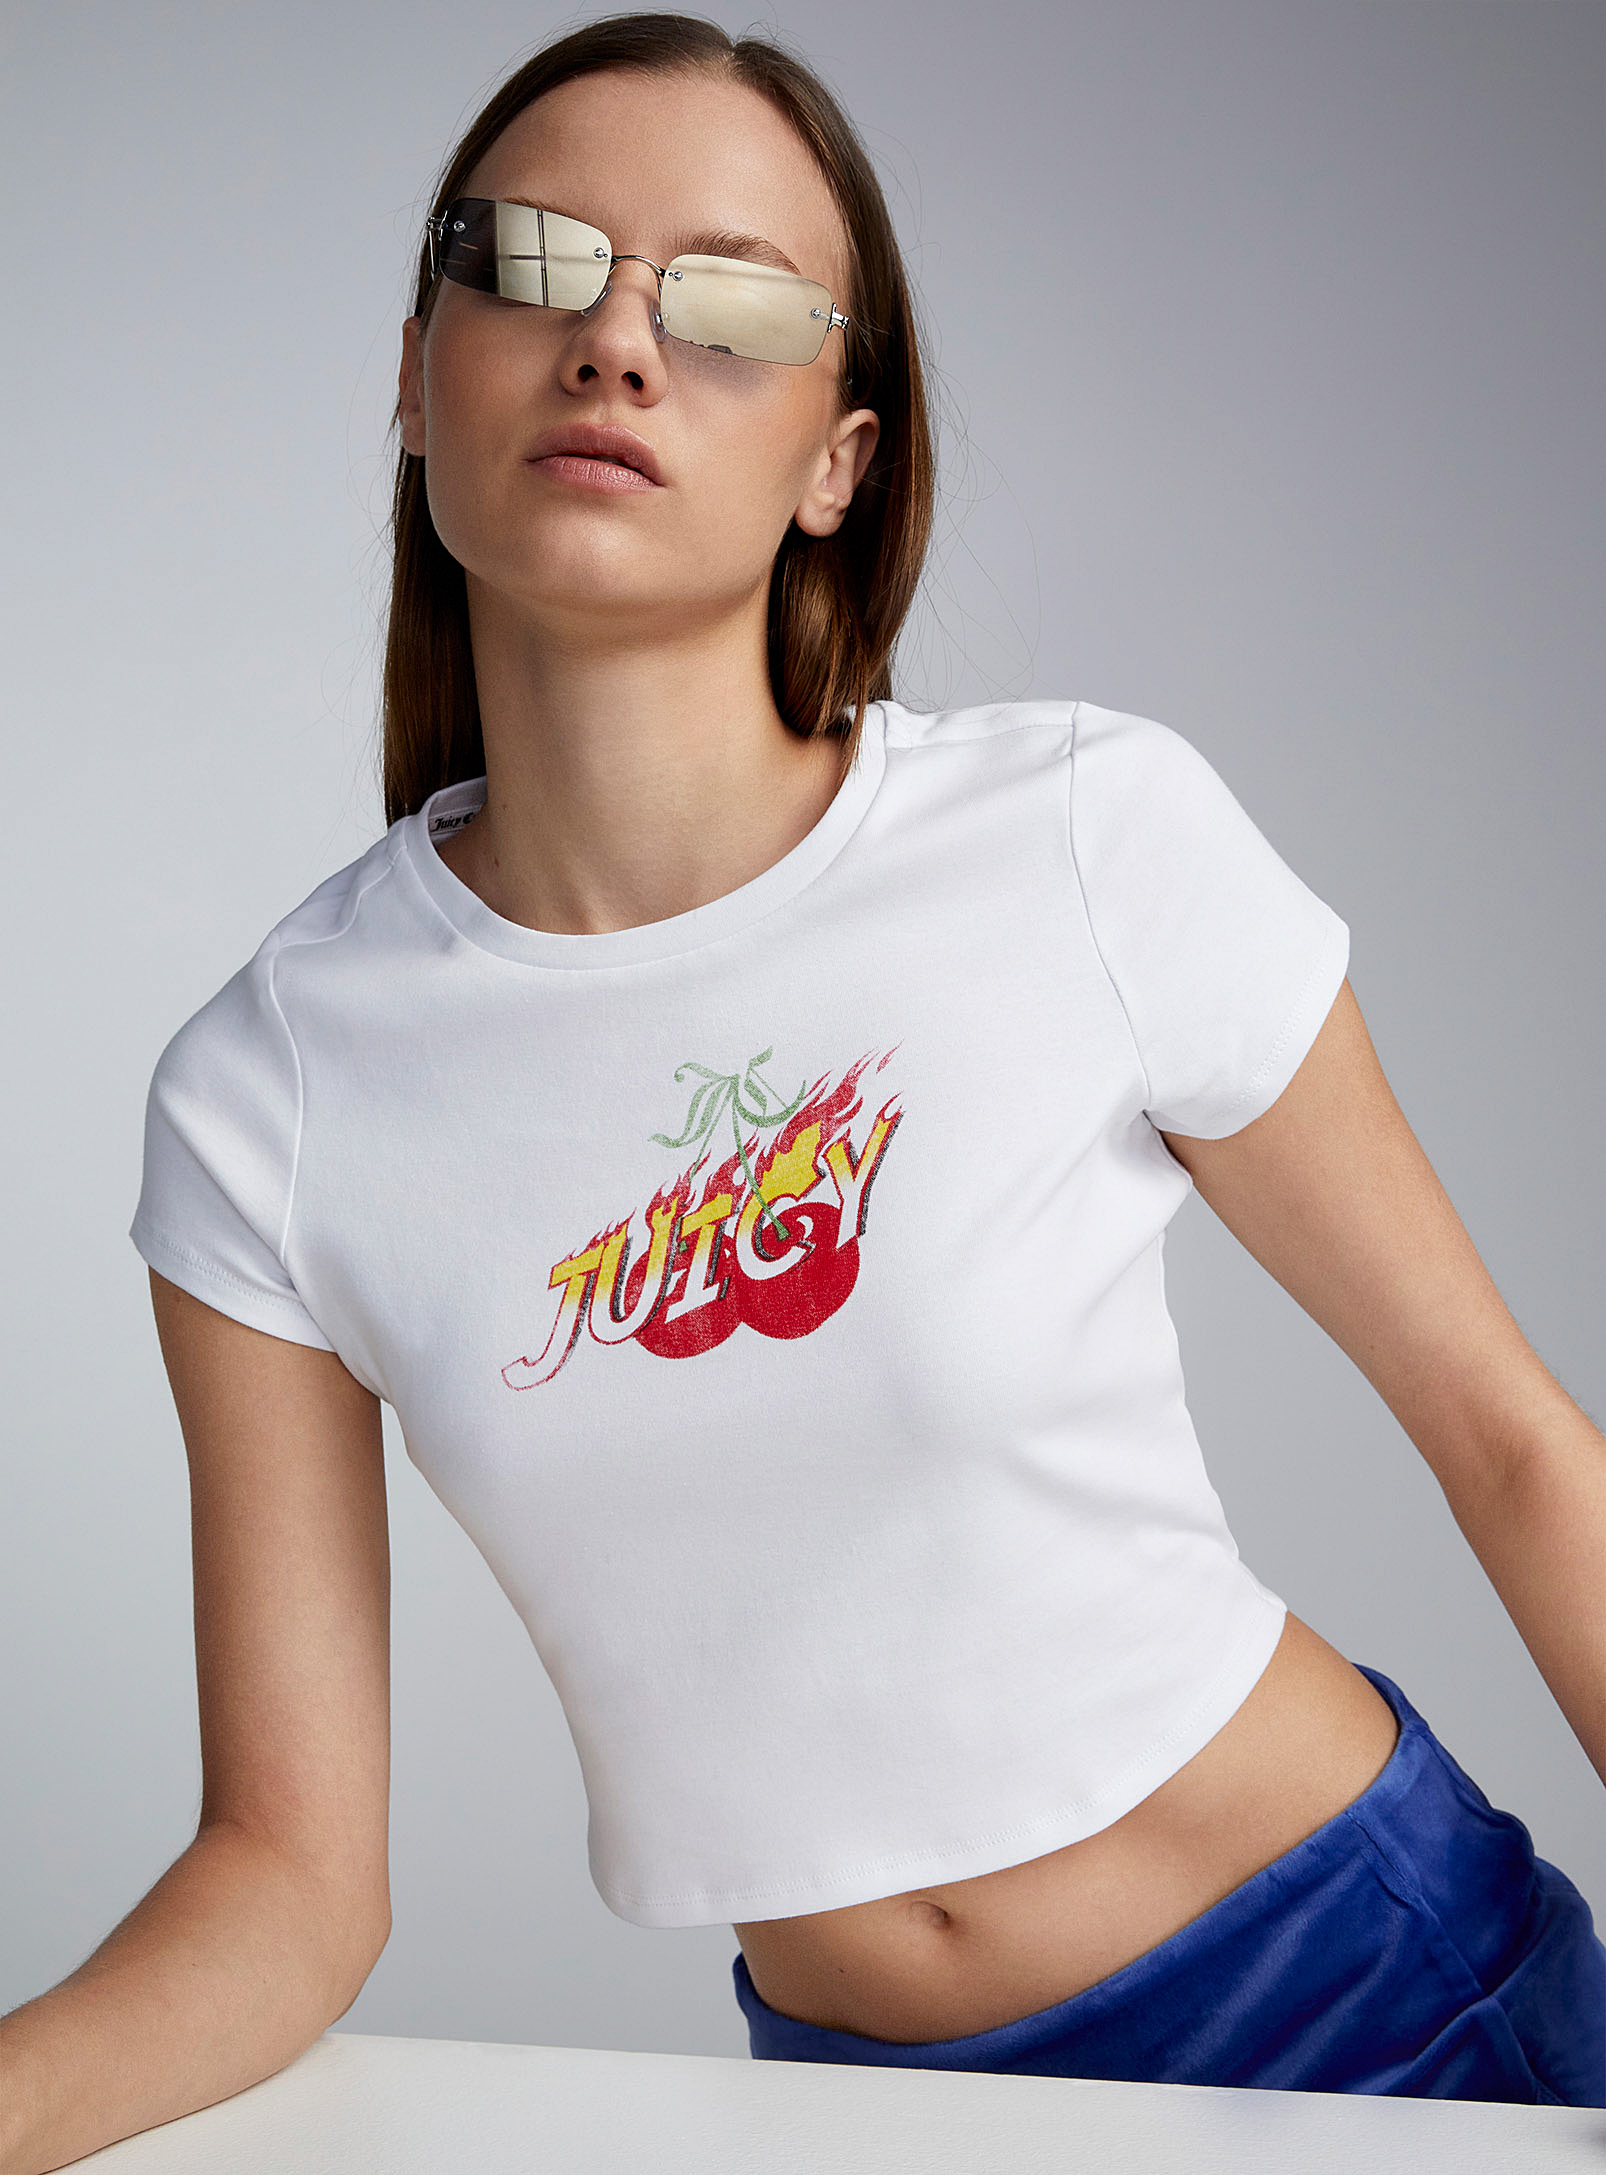 Juicy Couture - Women's Cherries and flames T-shirt